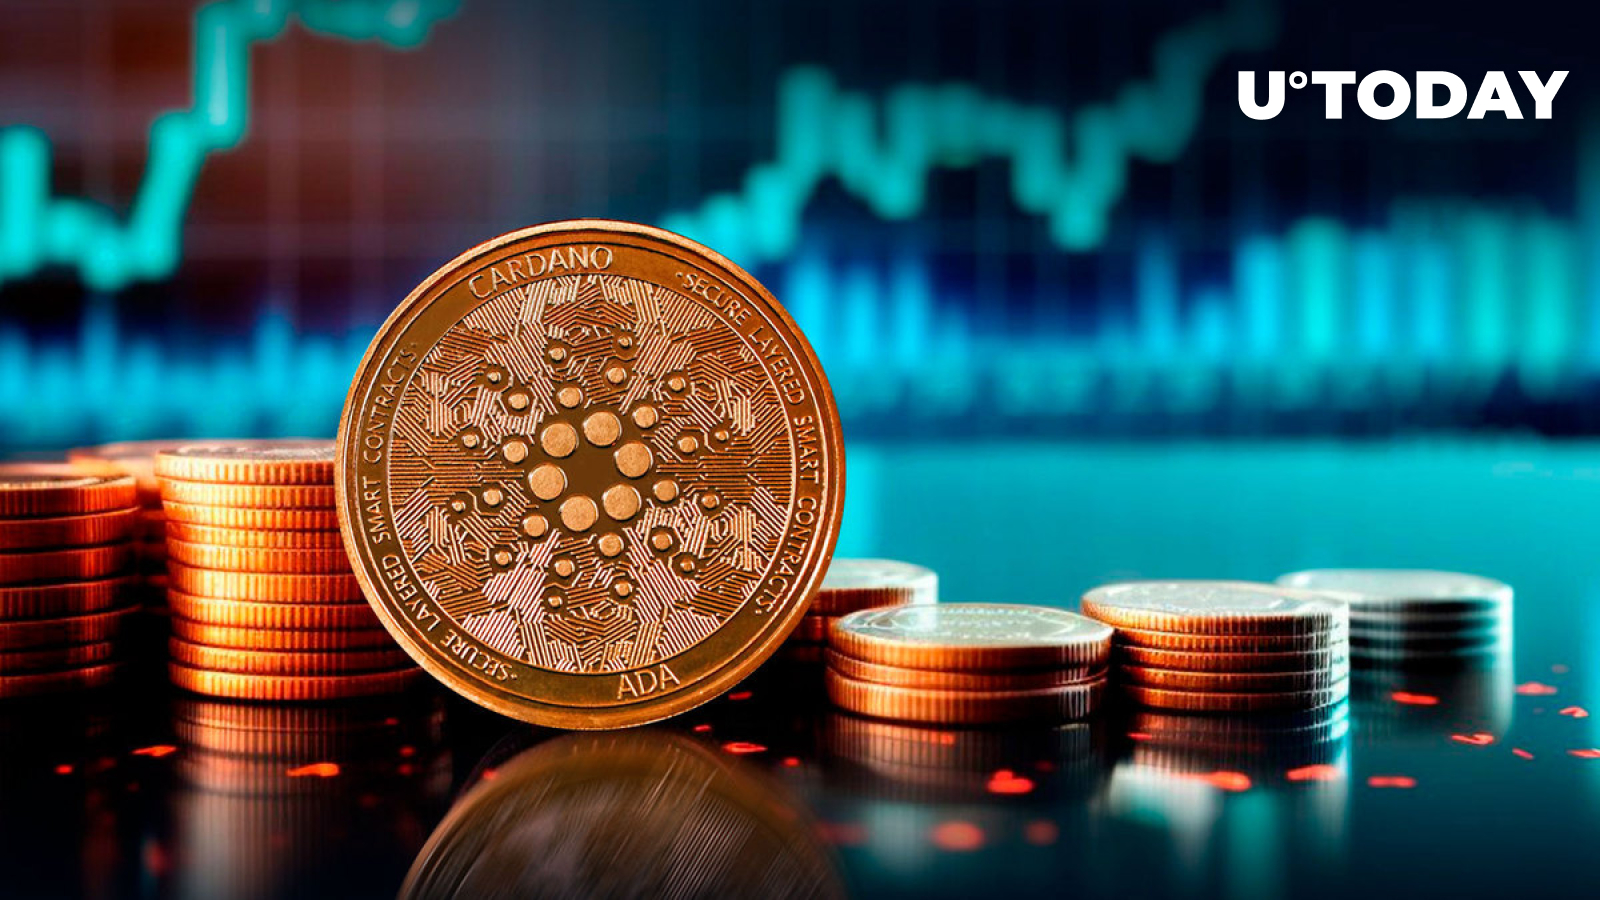 Cardano Sees Explosive 1,016% Surge in Fund Inflows, While ADA Price Targets $0.68